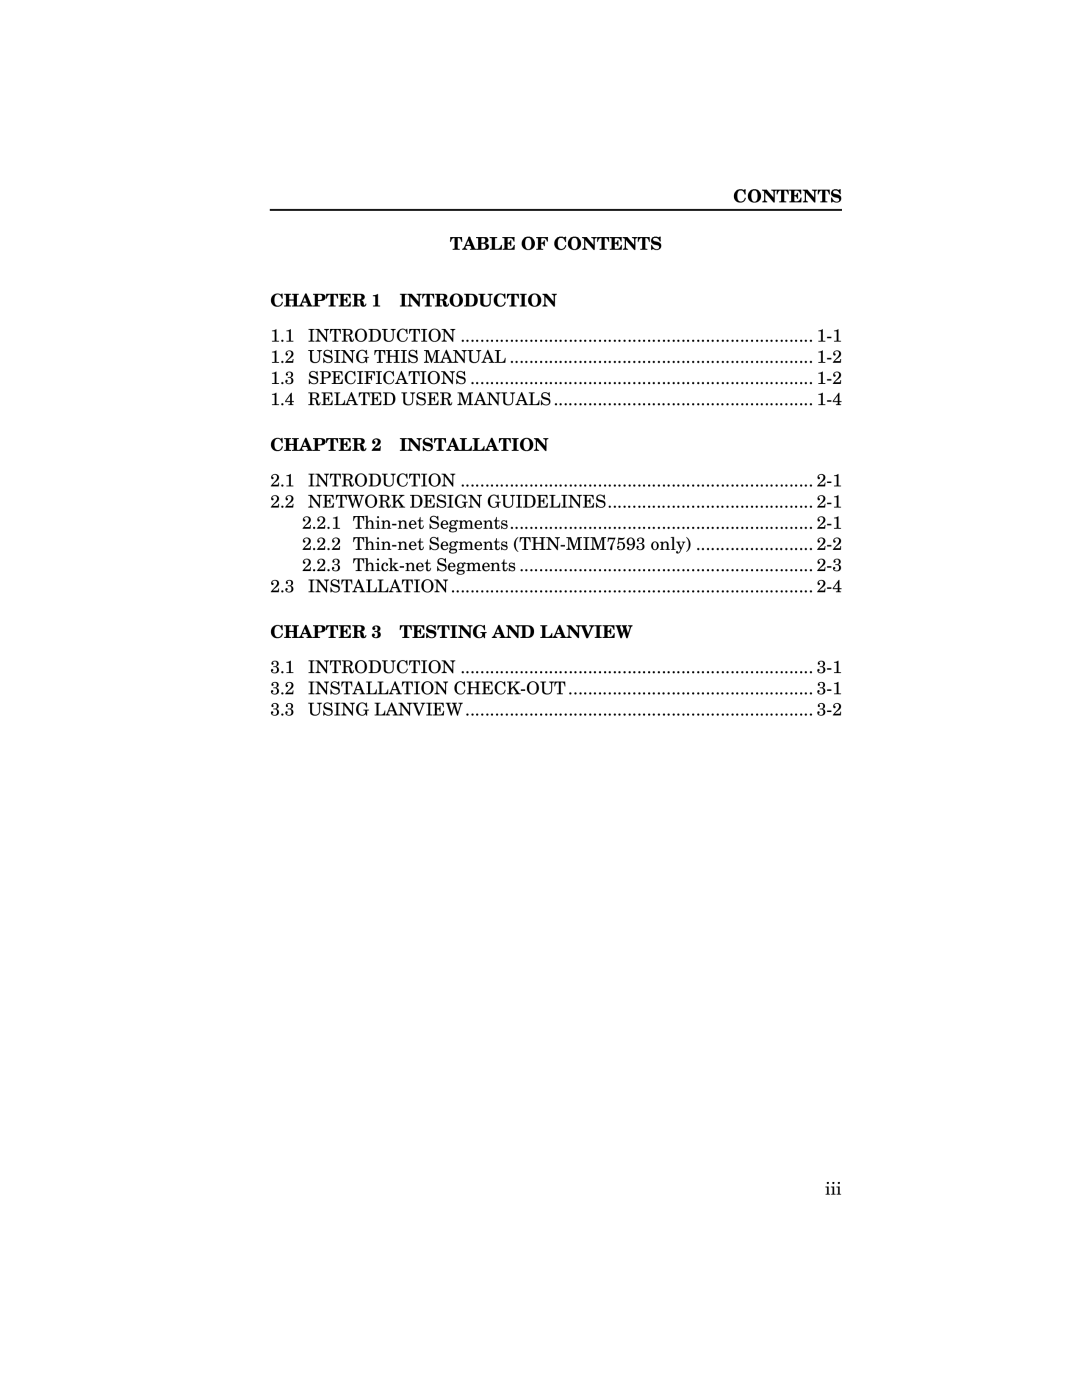 Cabletron Systems THN-MIM manual Table Of Contents, Introduction, Installation, Testing And Lanview 